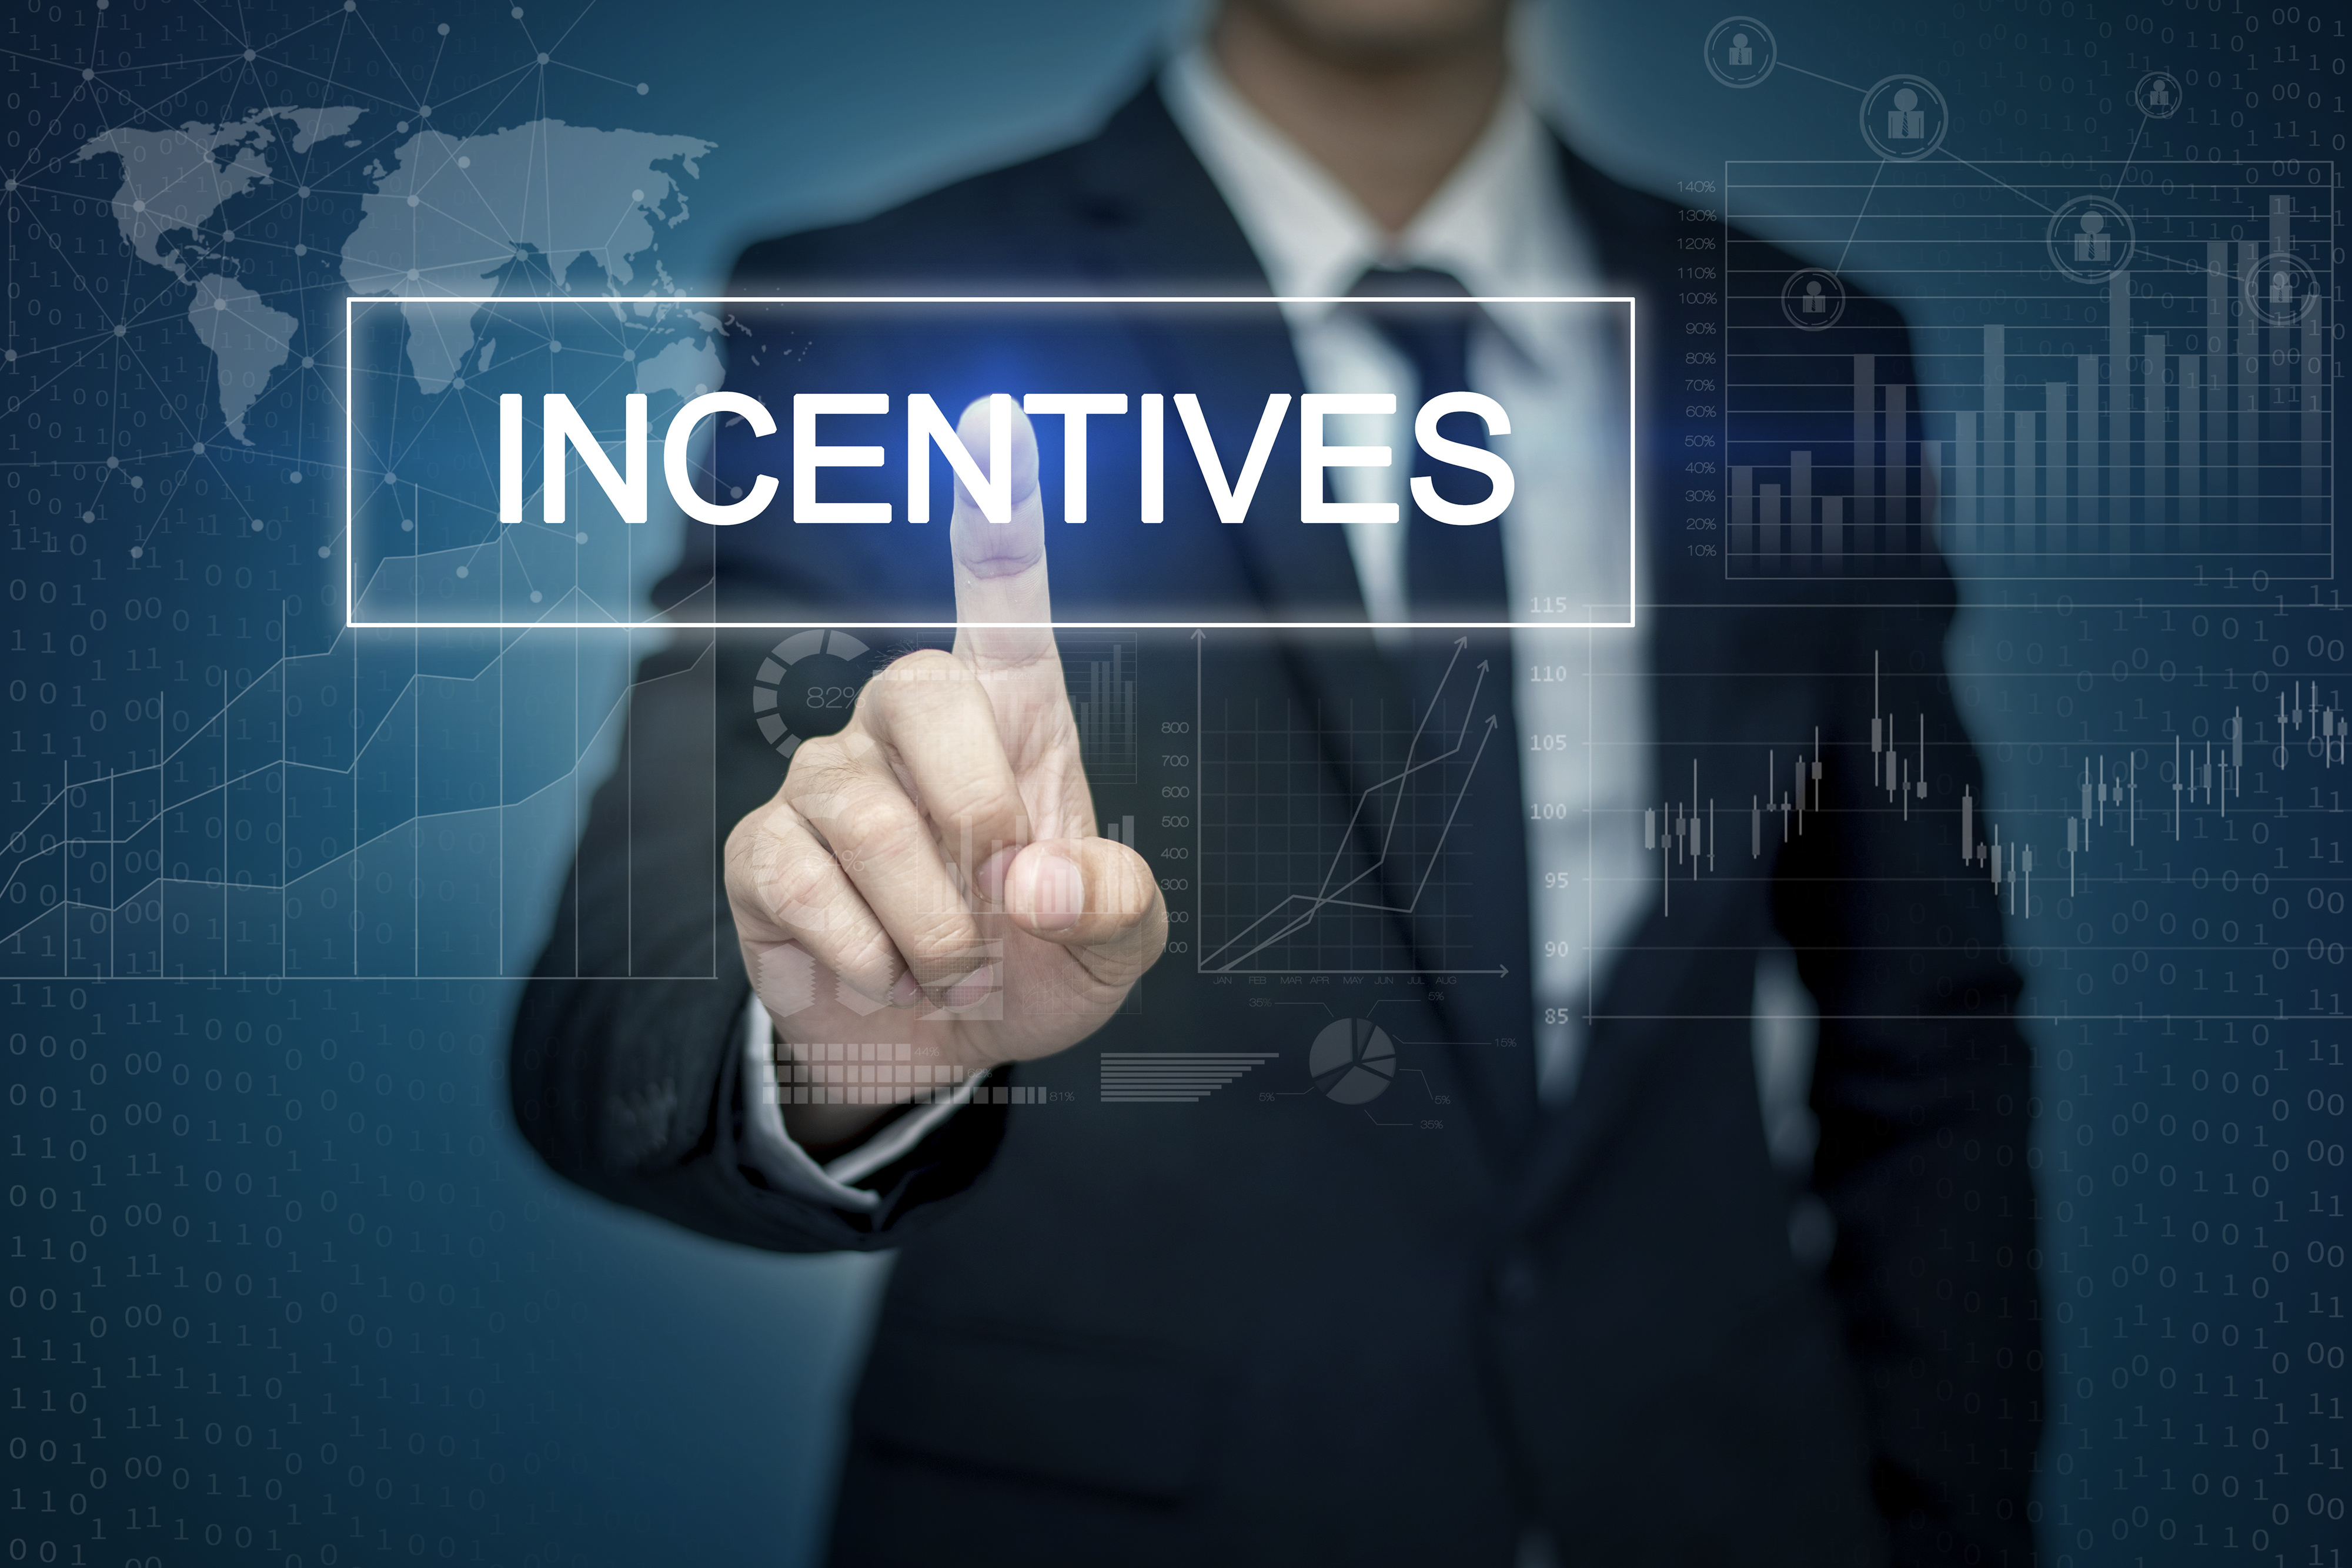 INCENTIVES